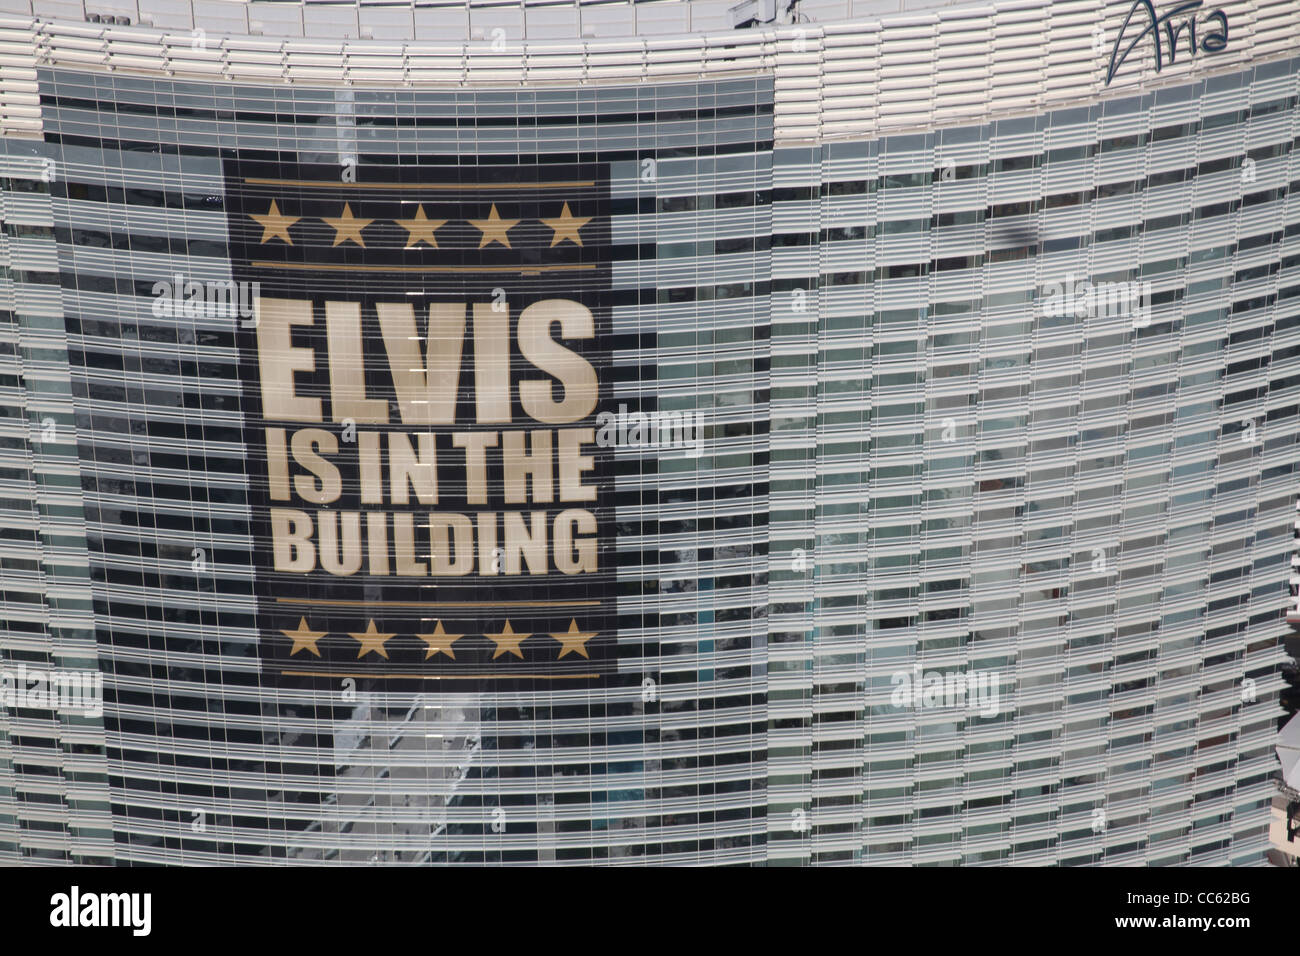 A sky scraper in Las Vagas Nevada with the iconic phrase Elivis is in the building Stock Photo